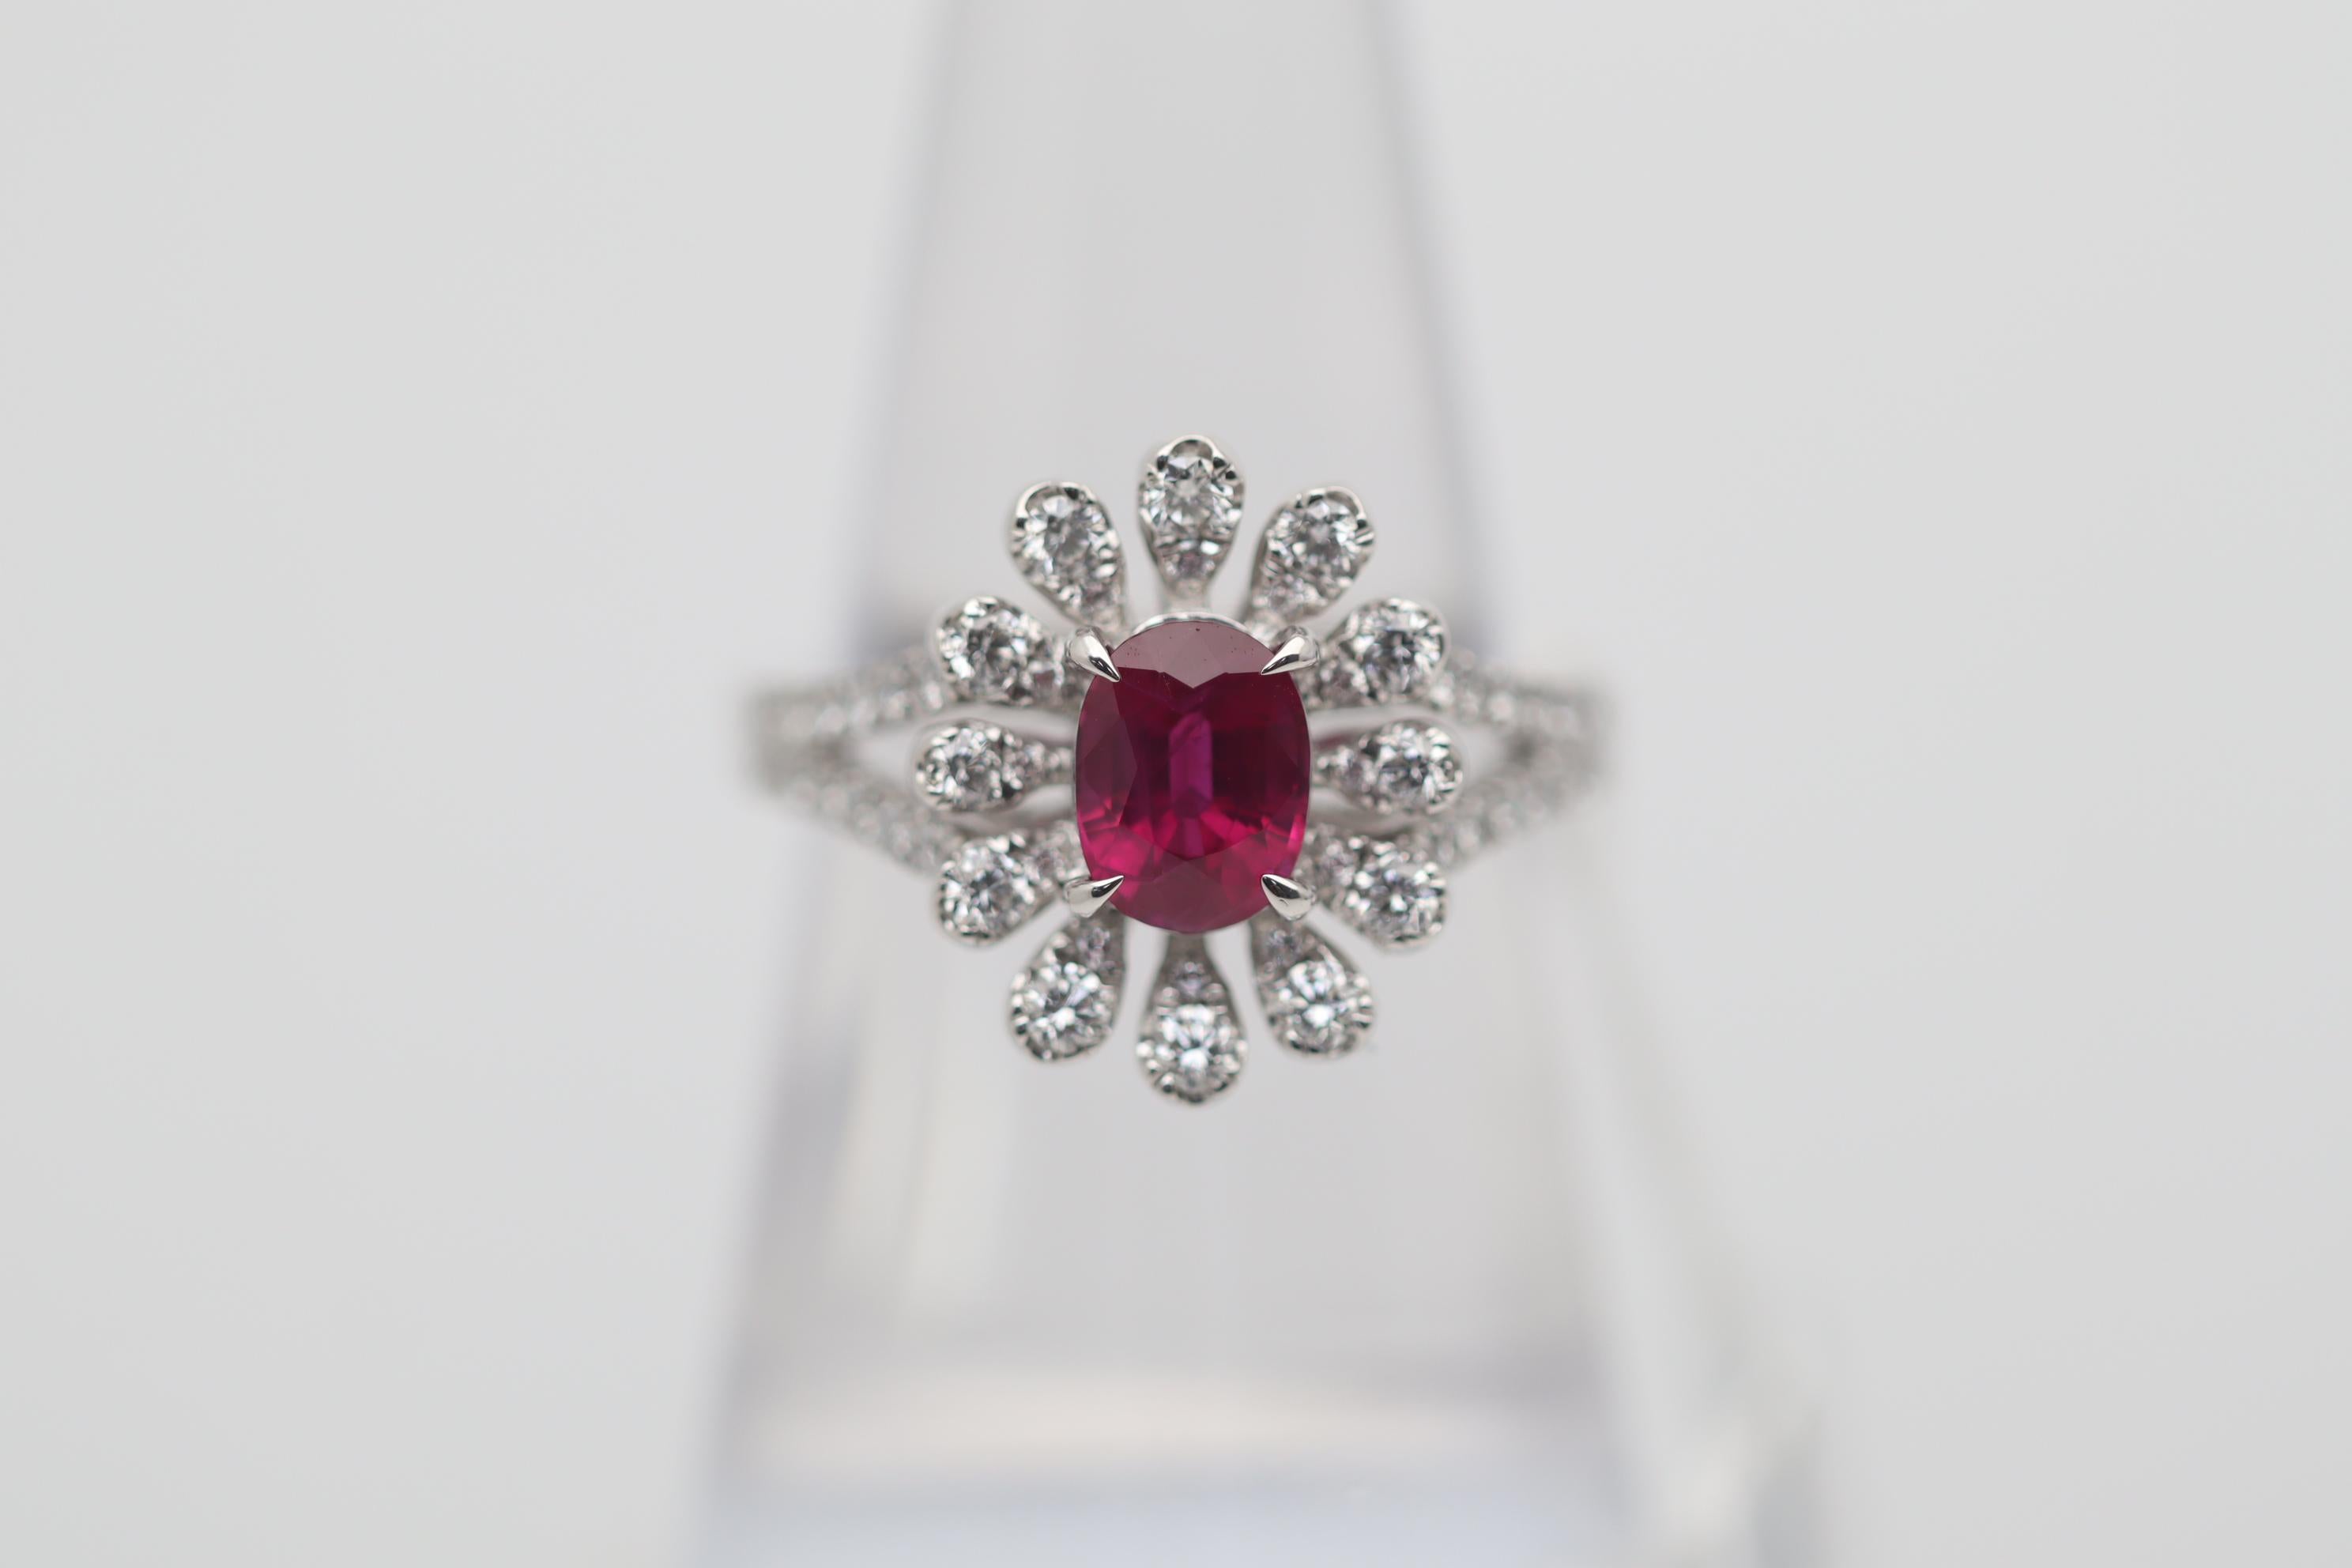 A rich and vibrant ruby from the famous mines of Burma take center stage. It weighs 1.37 carats and has a rich intense color seen in finer Burmese stones. Certified as natural with Burmese origin by the GIA. It is complemented by 0.60 carats of